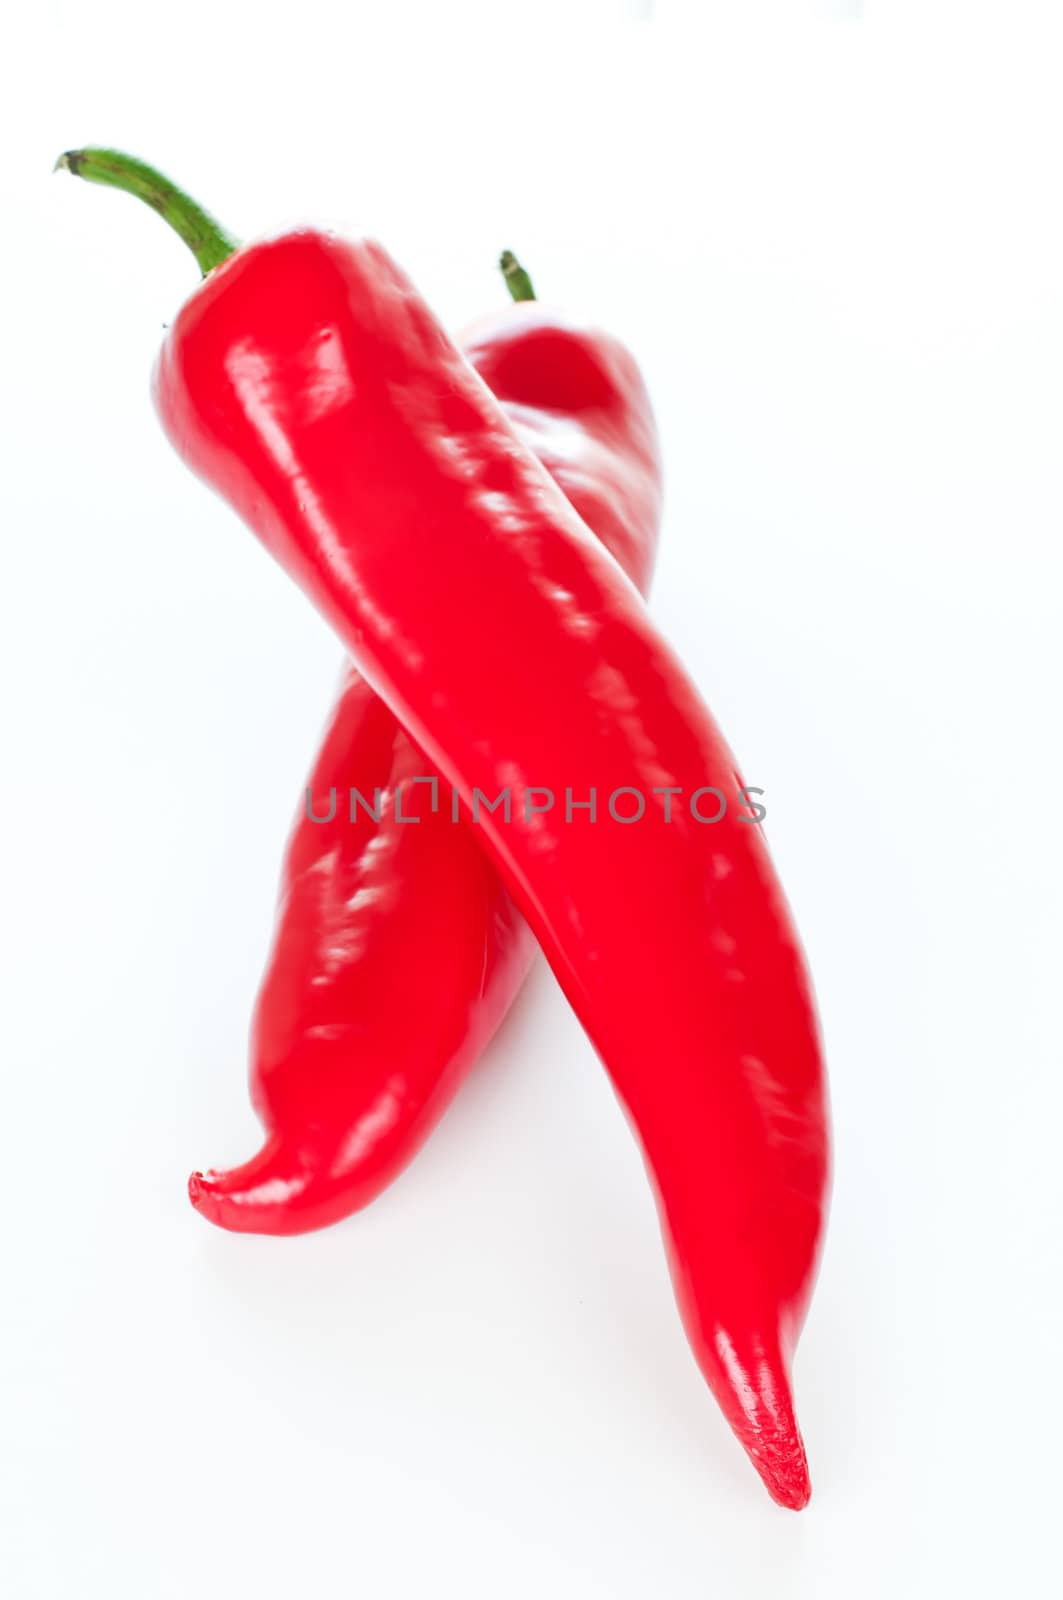 Paprika peppers on white background close up